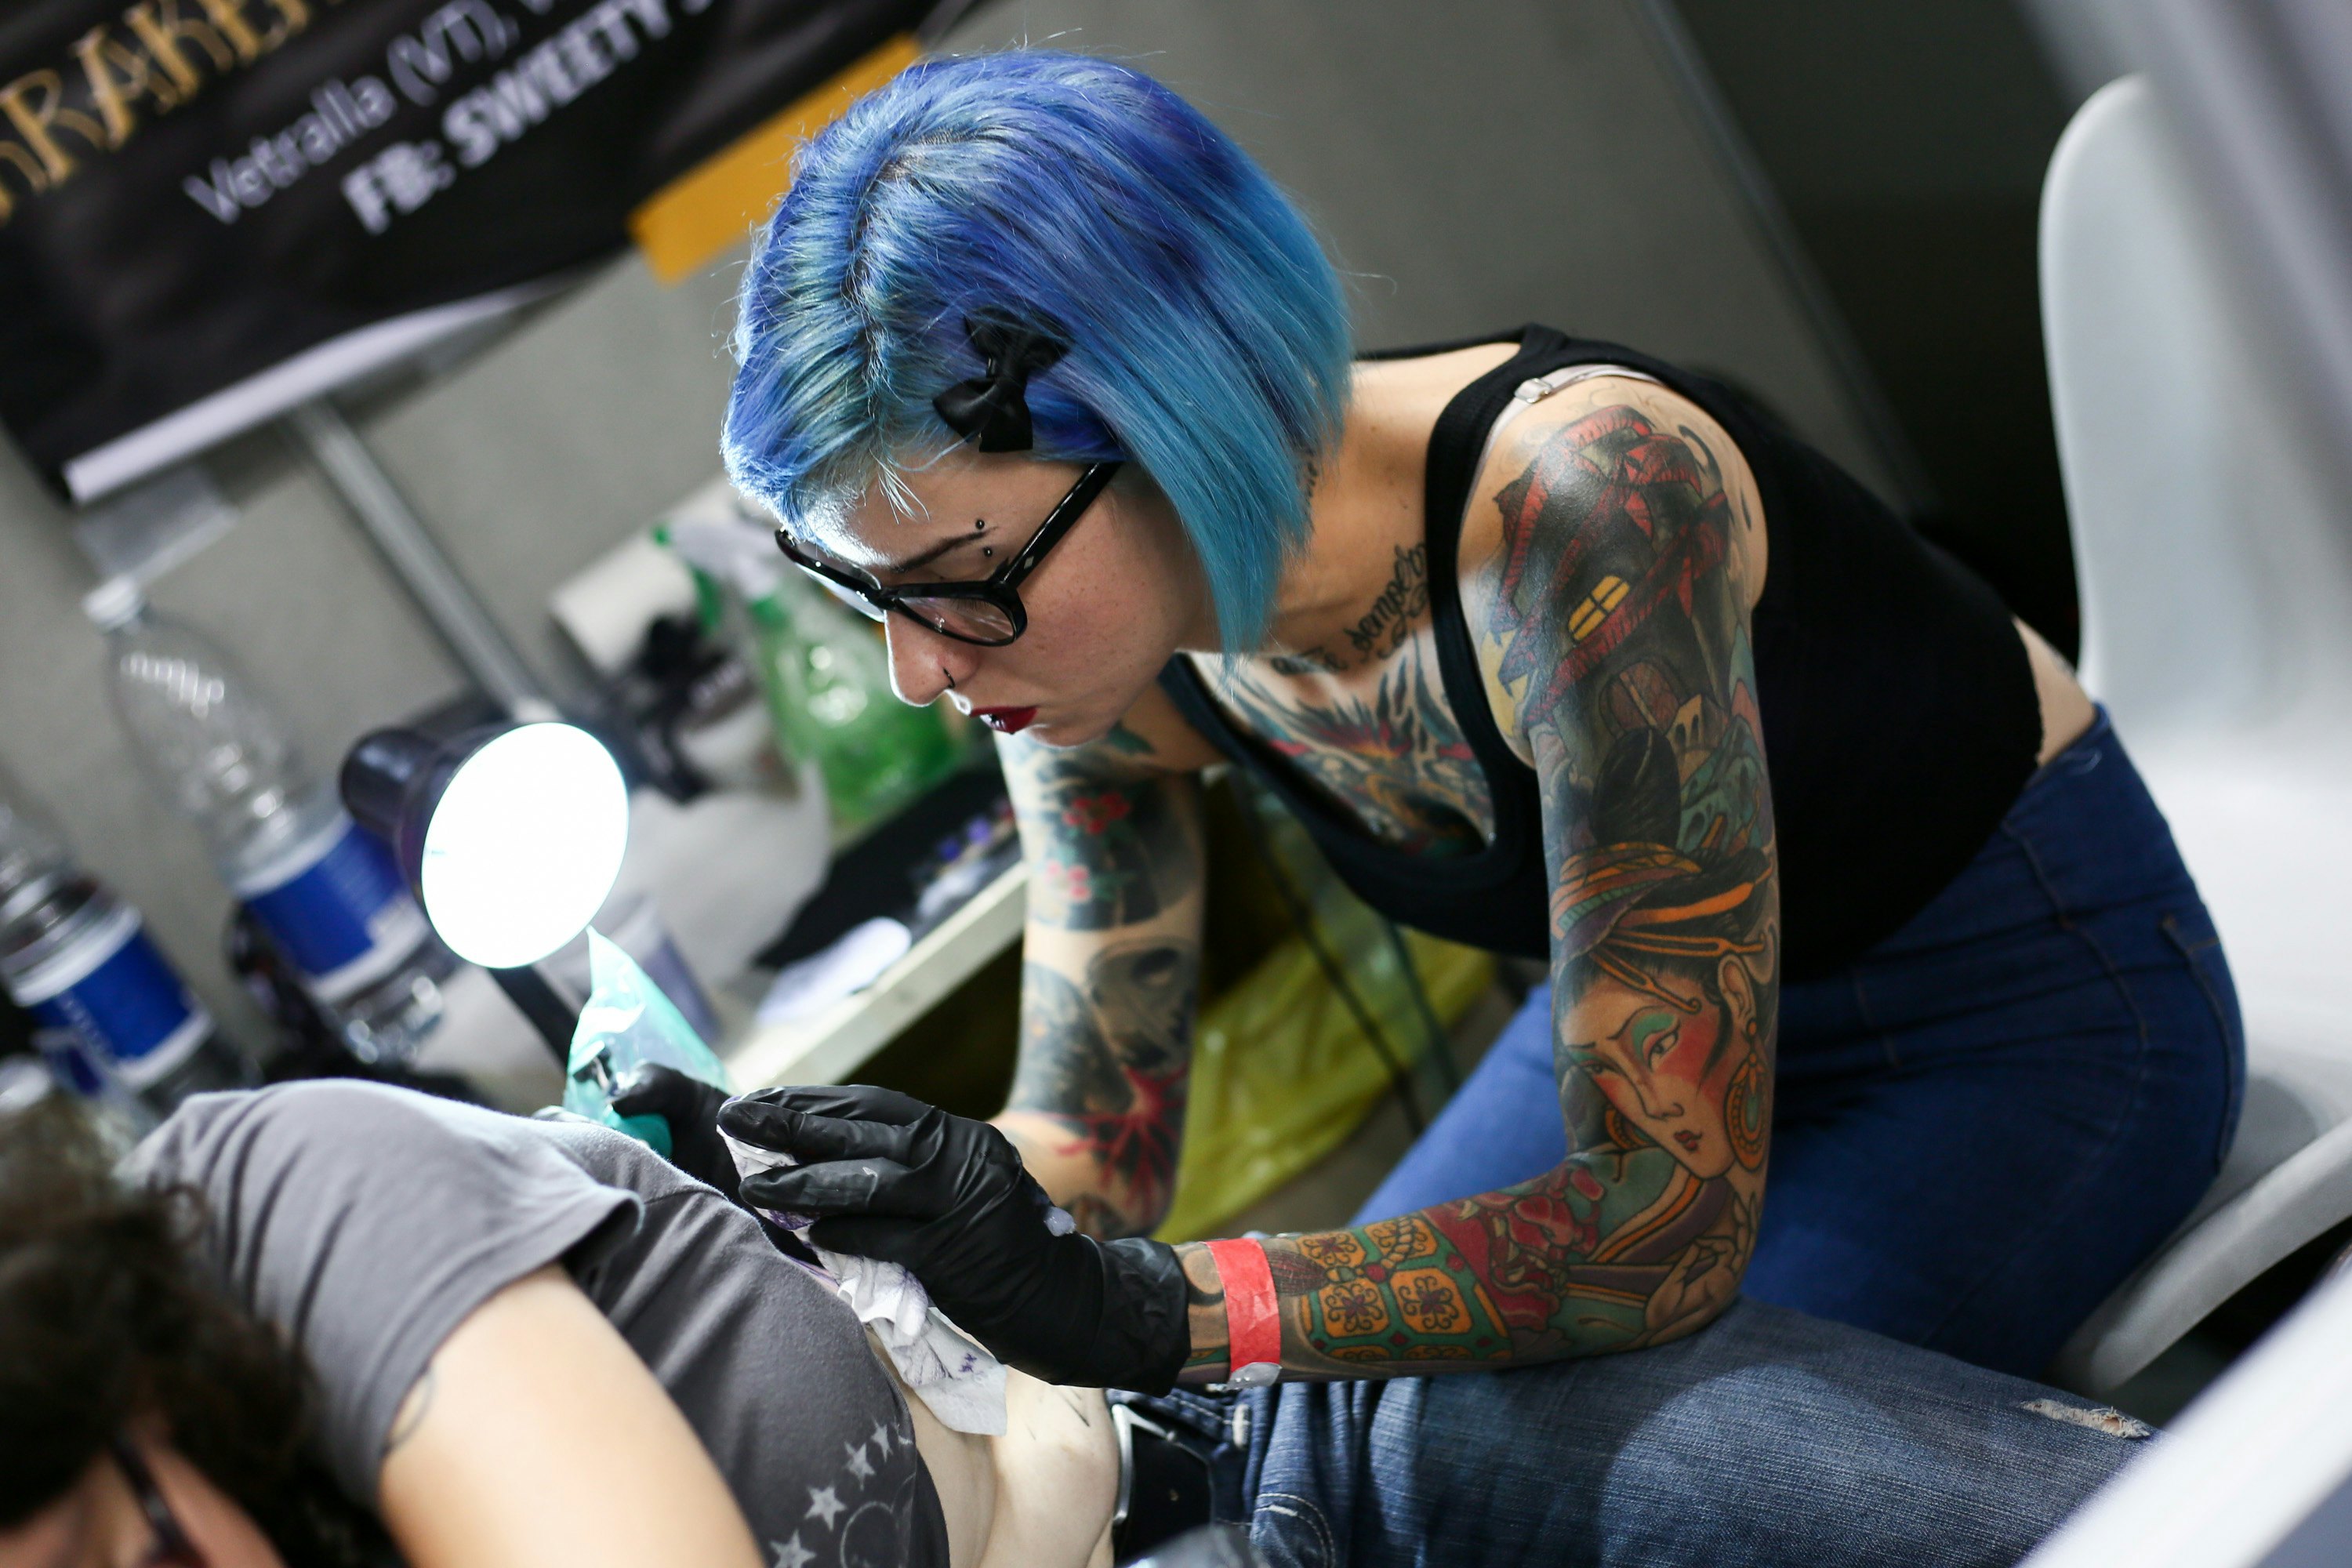 Artist Opens Tattoo Shop That Specializes In Anime Tats  Aazios LGBTQ  News and Entertainment